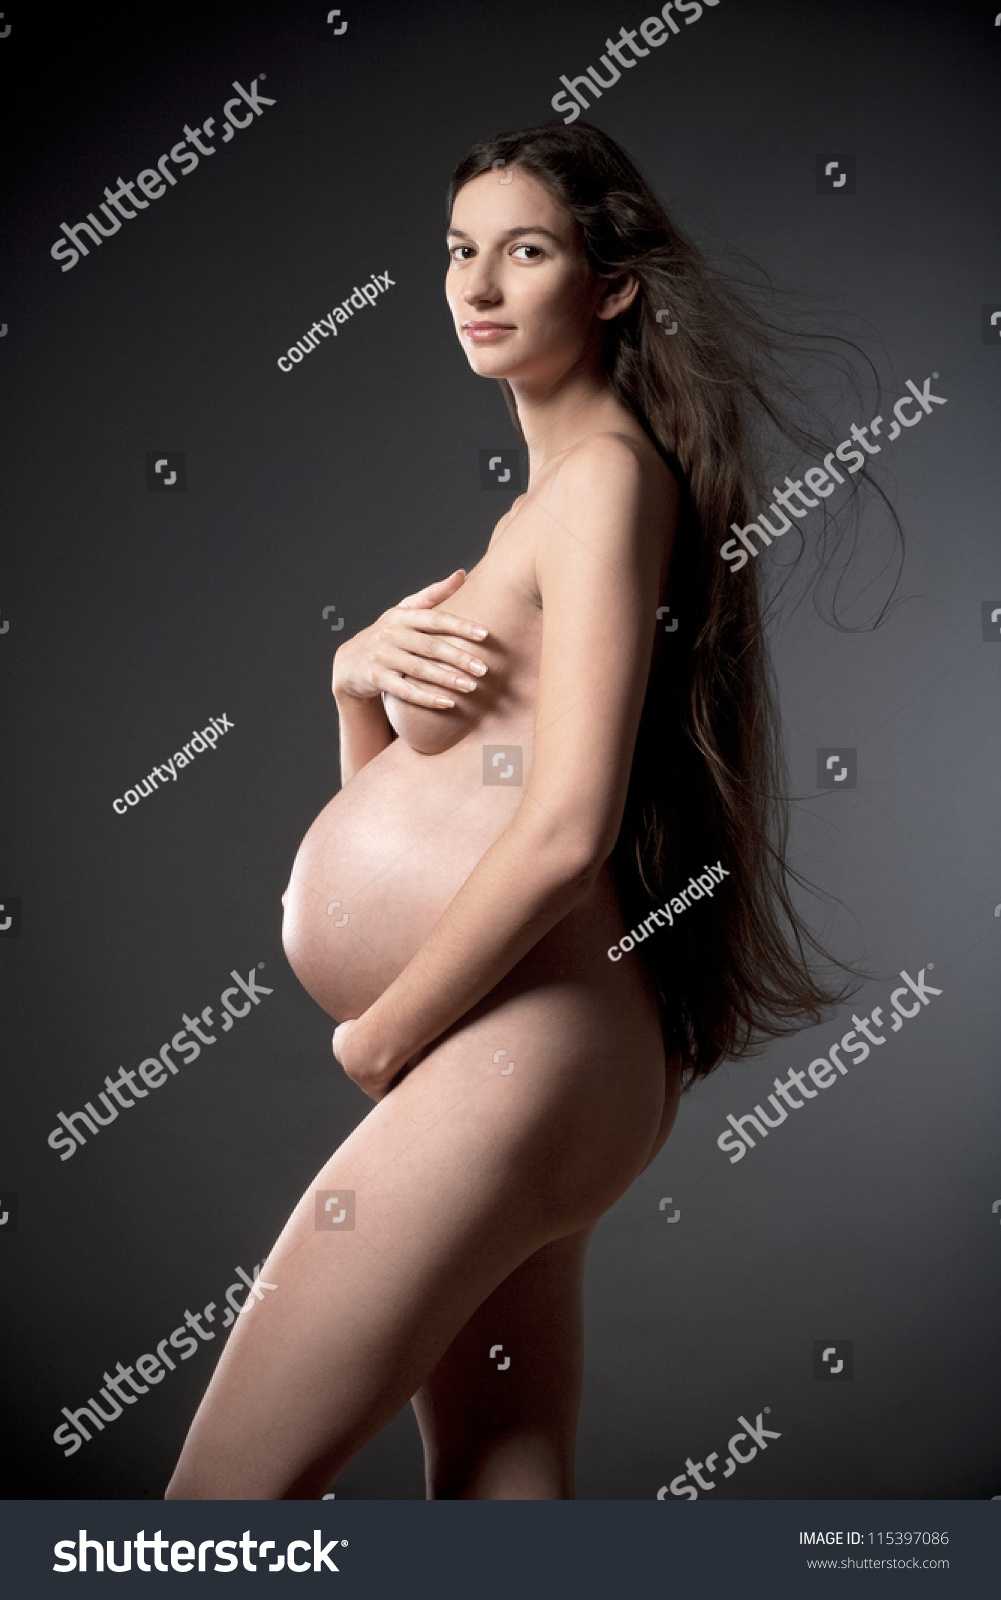 Nude Pictures Of Pregnant Women 12